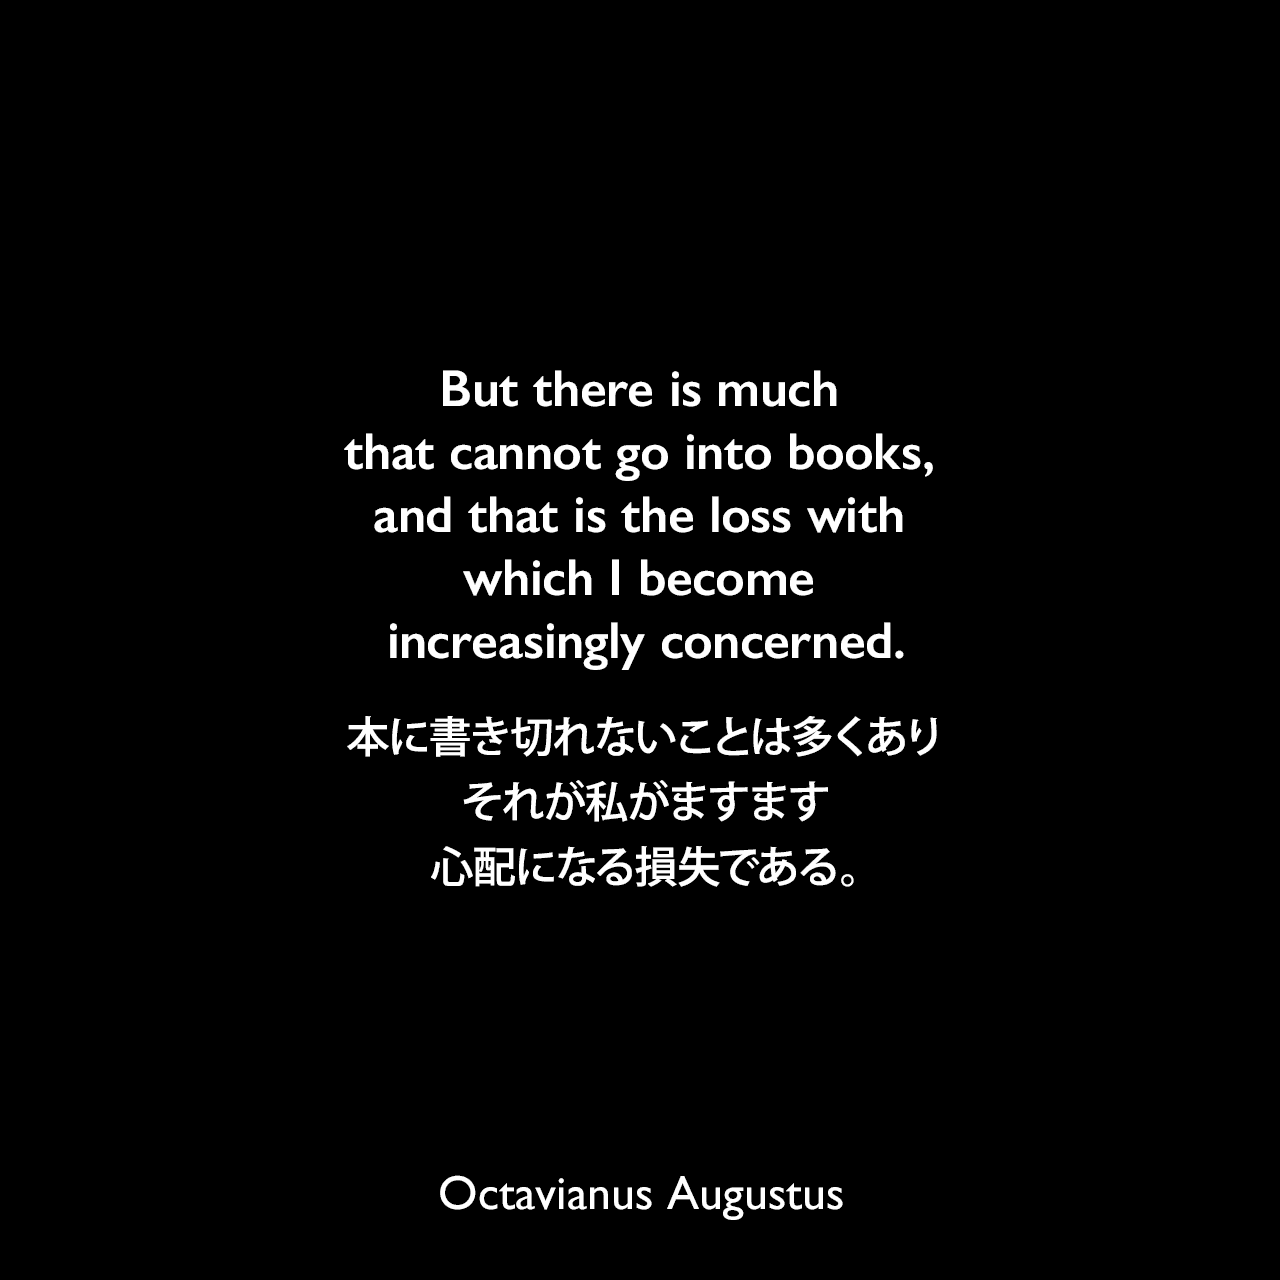 But there is much that cannot go into books, and that is the loss with which I become increasingly concerned.本に書き切れないことは多くあり、それが私がますます心配になる損失である。- ジョン・エドワード・ウィリアムズによる本「Augustus」よりOctavianus Augustus